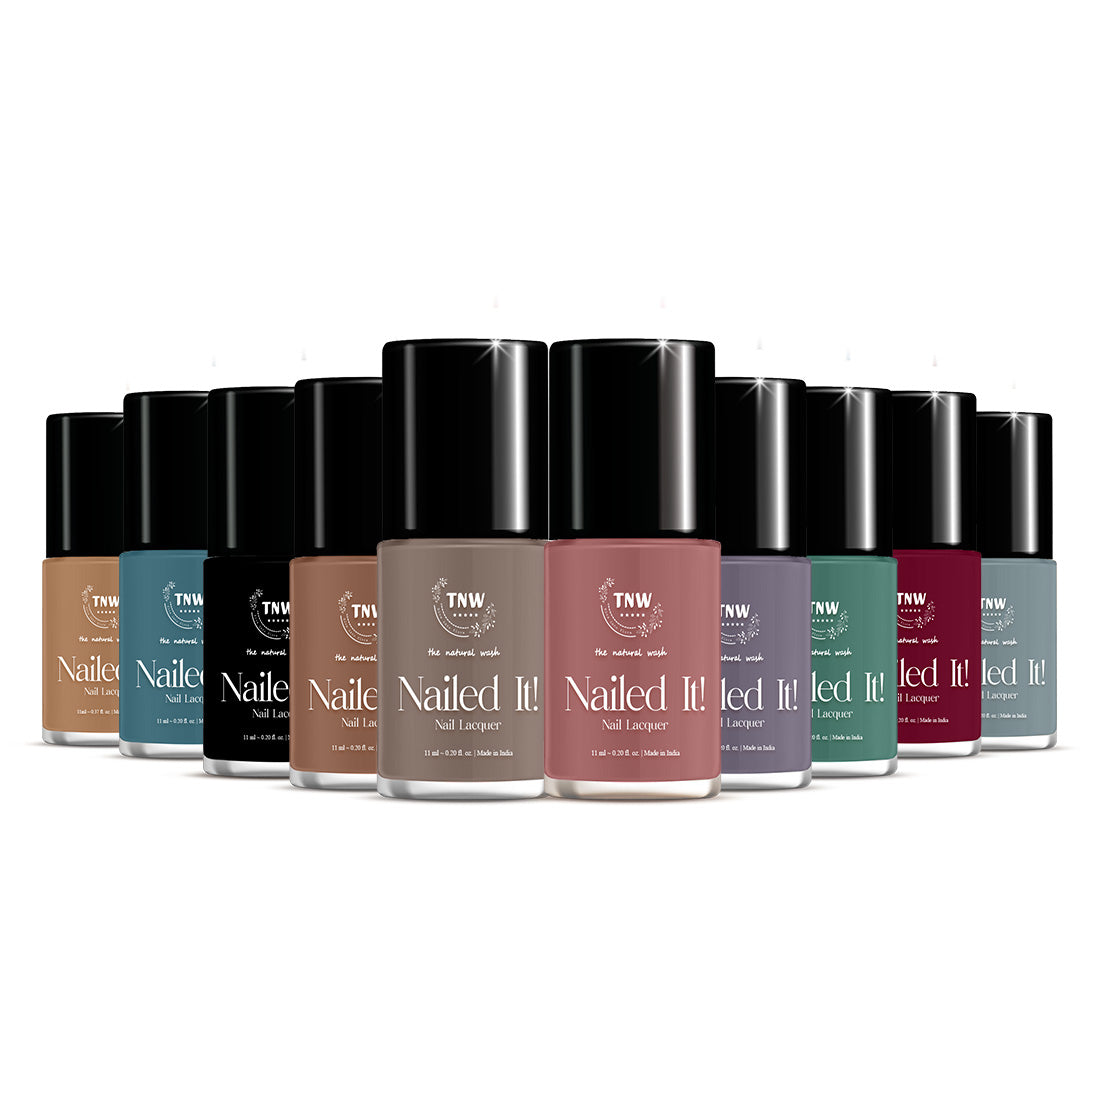 Nailed It! Nail Lacquer Pack of 10